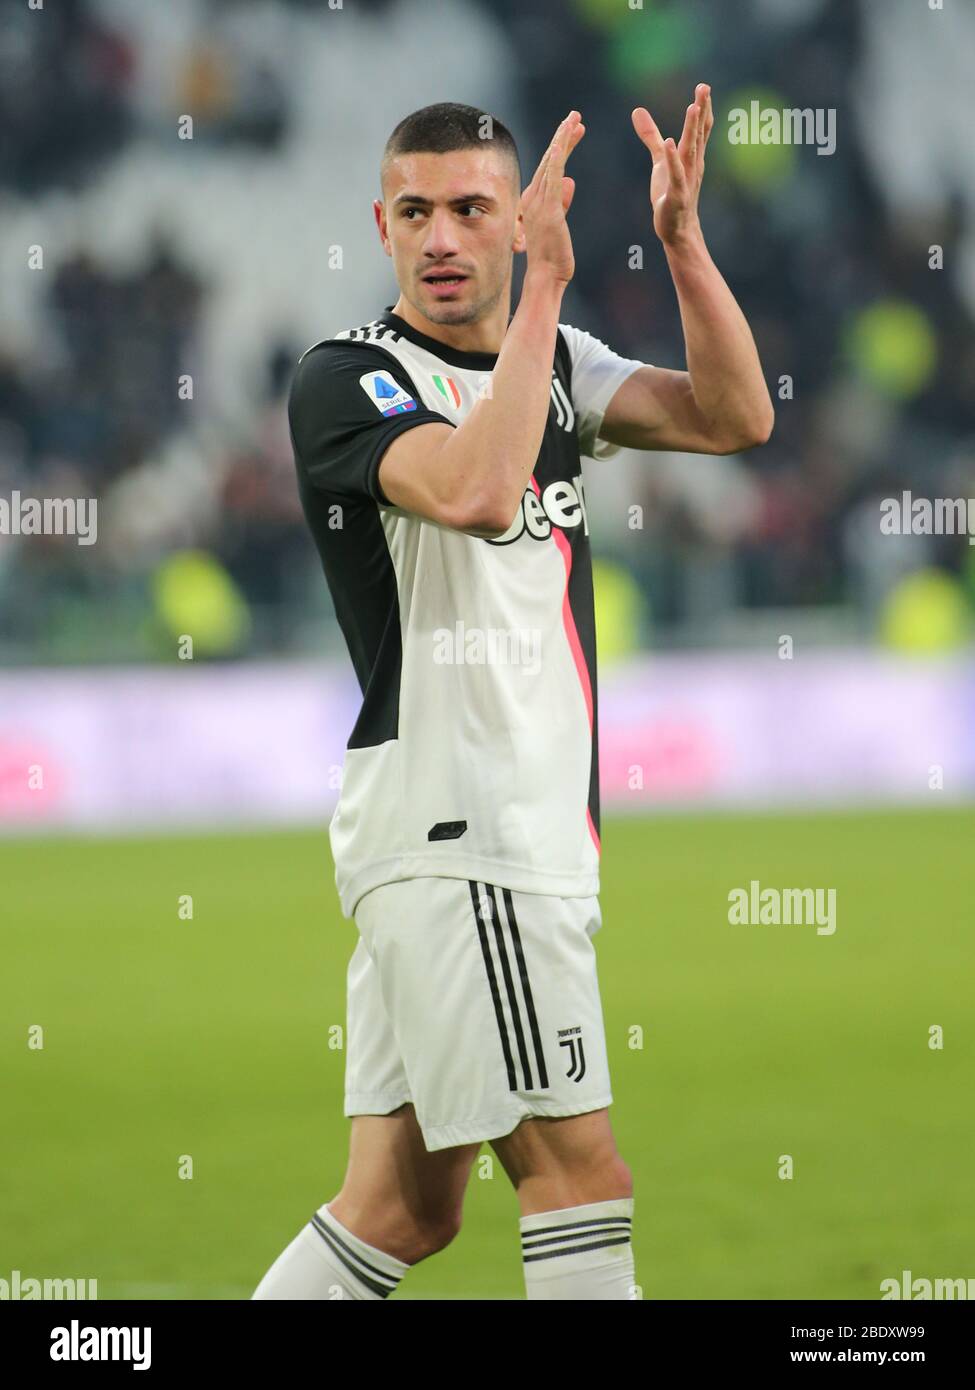 January 1, 2020, Turin, Italy: Turin, Italy, , 01 Jan 2020, 28 Merith Demiral (JUVENTUS) during  -  - Credit: LM/Claudio Benedetto (Credit Image: © Claudio Benedetto/LPS via ZUMA Wire) Stock Photo